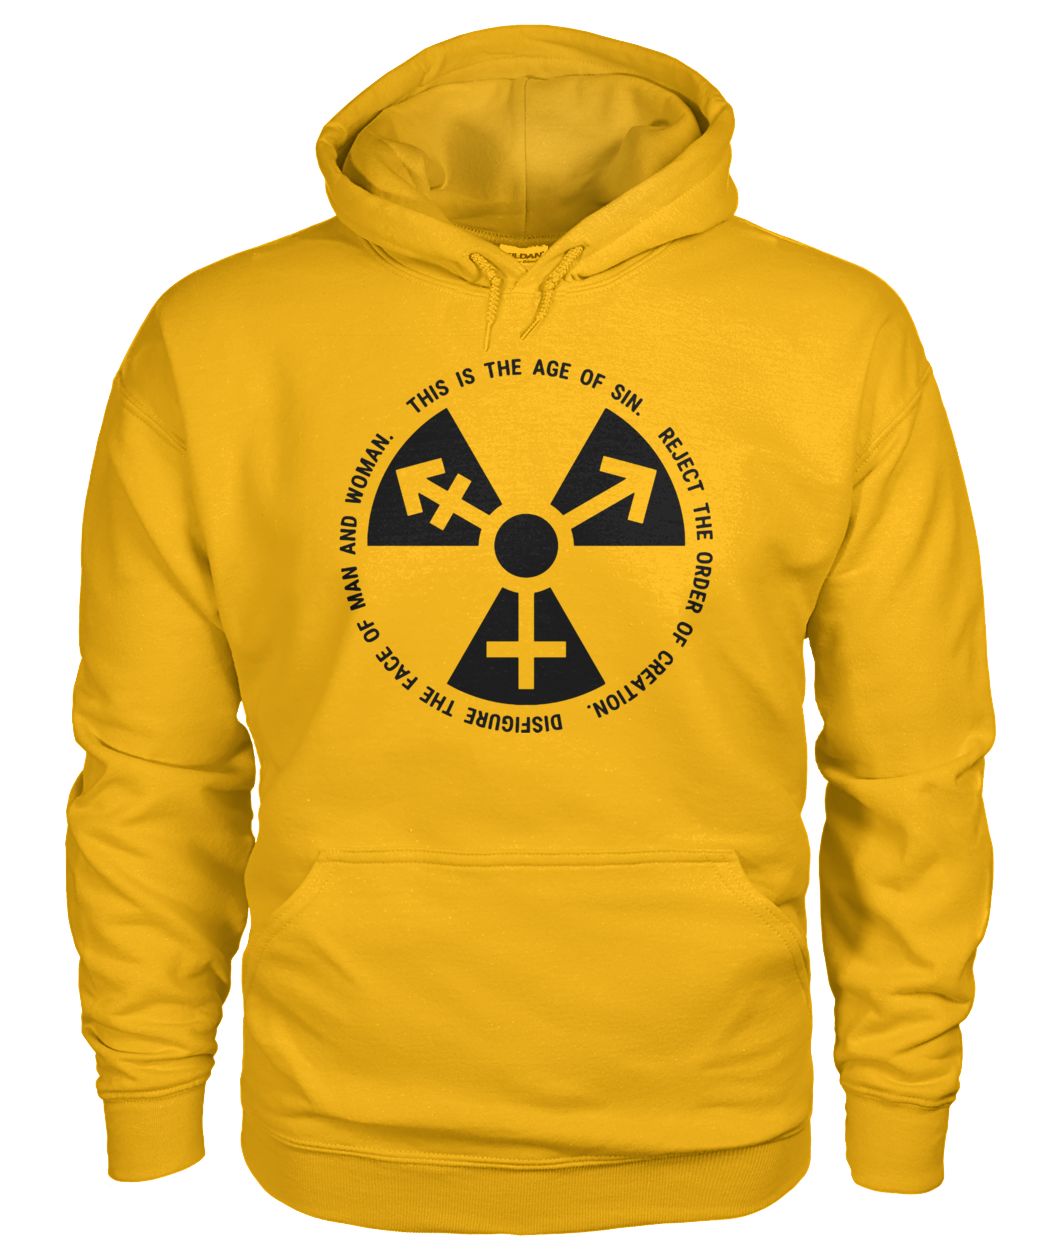 This is the age of sin reject the order of creation gildan hoodie